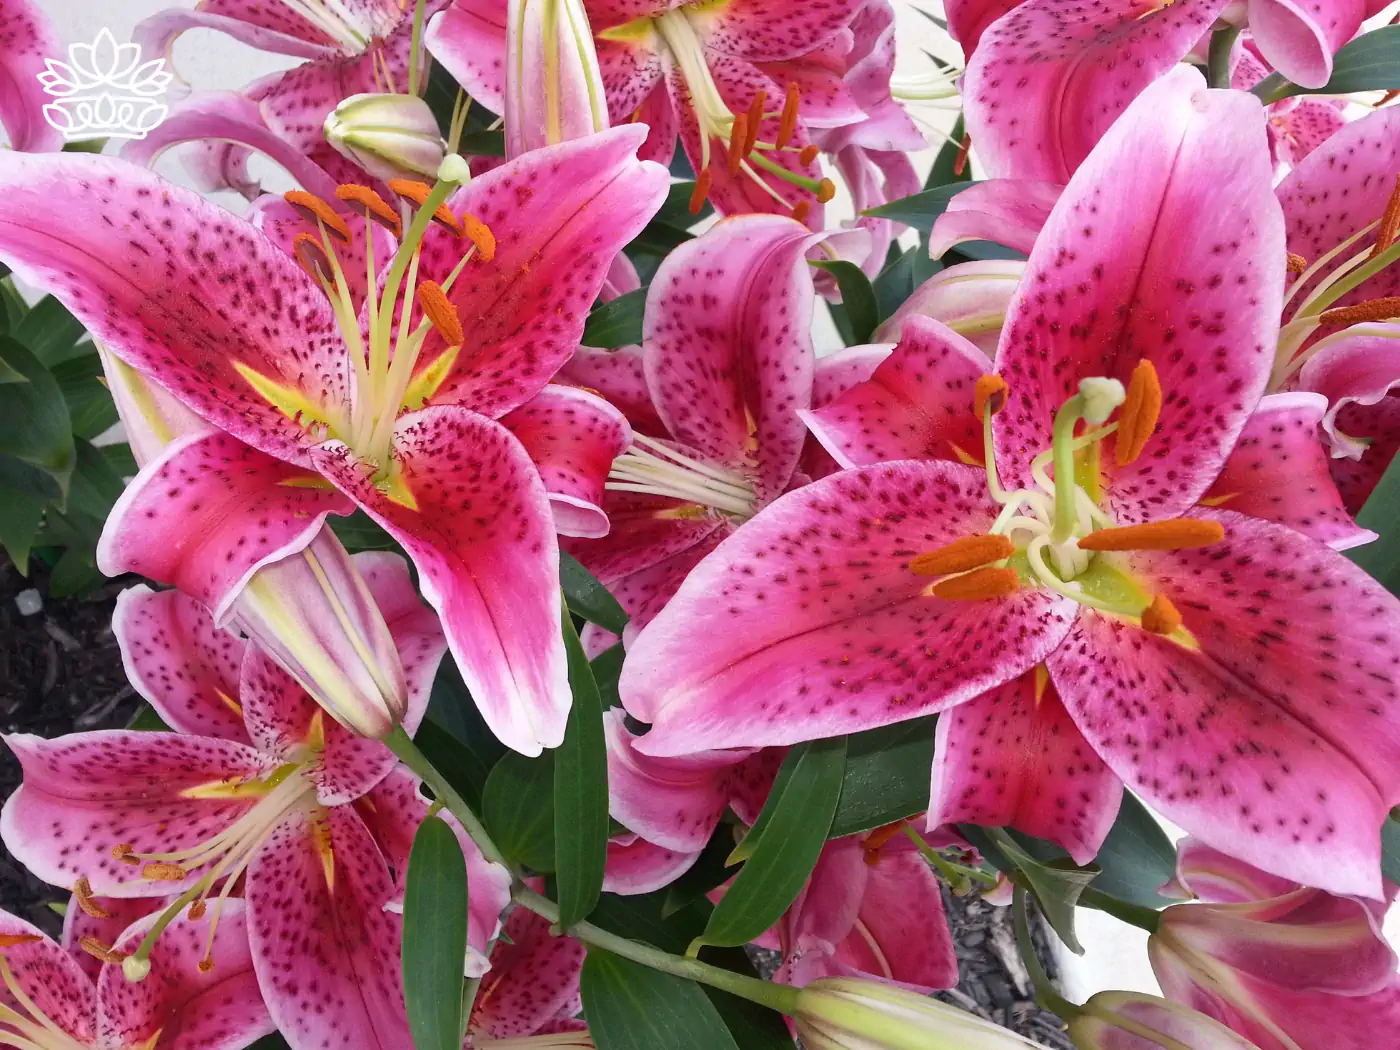 **Vibrant pink stargazer lilies in full bloom, showcasing their delicate petals and striking stamen. Fabulous Flowers and Gifts.**